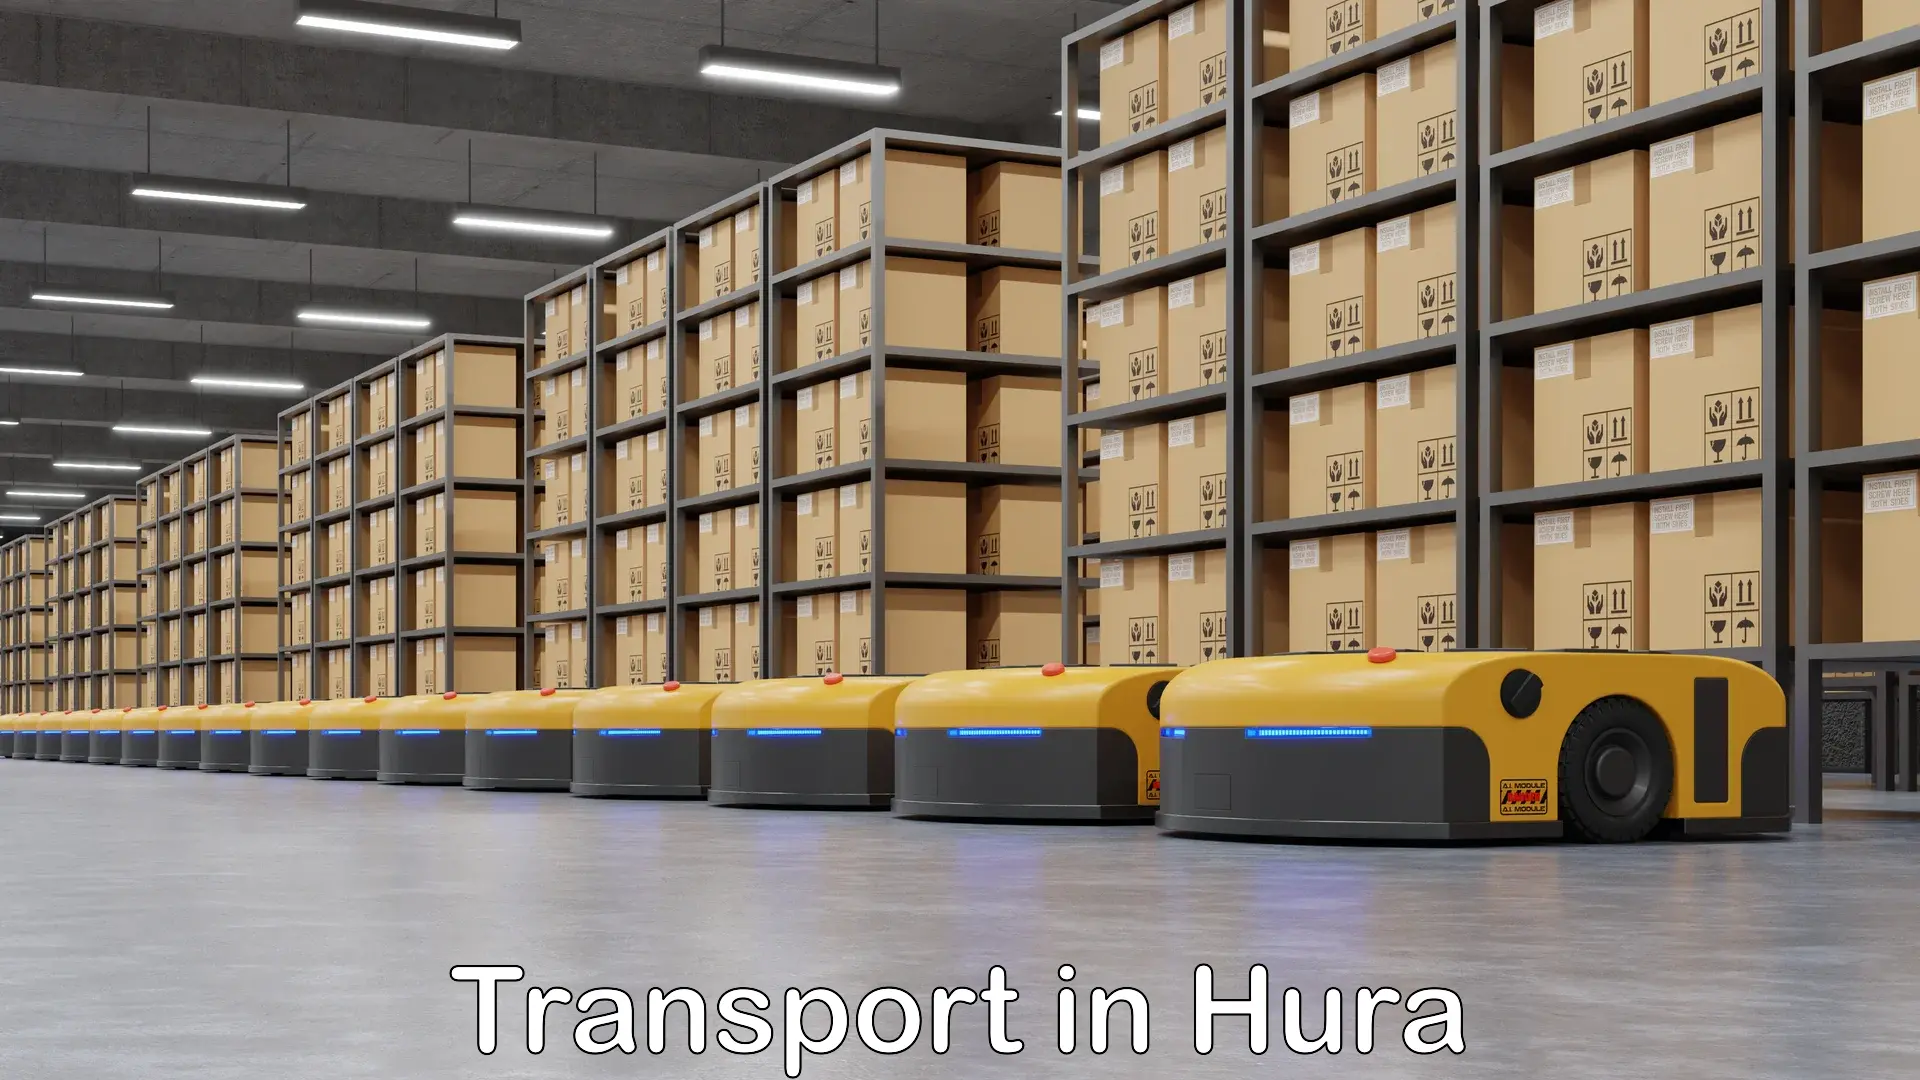 Container transport service in Hura